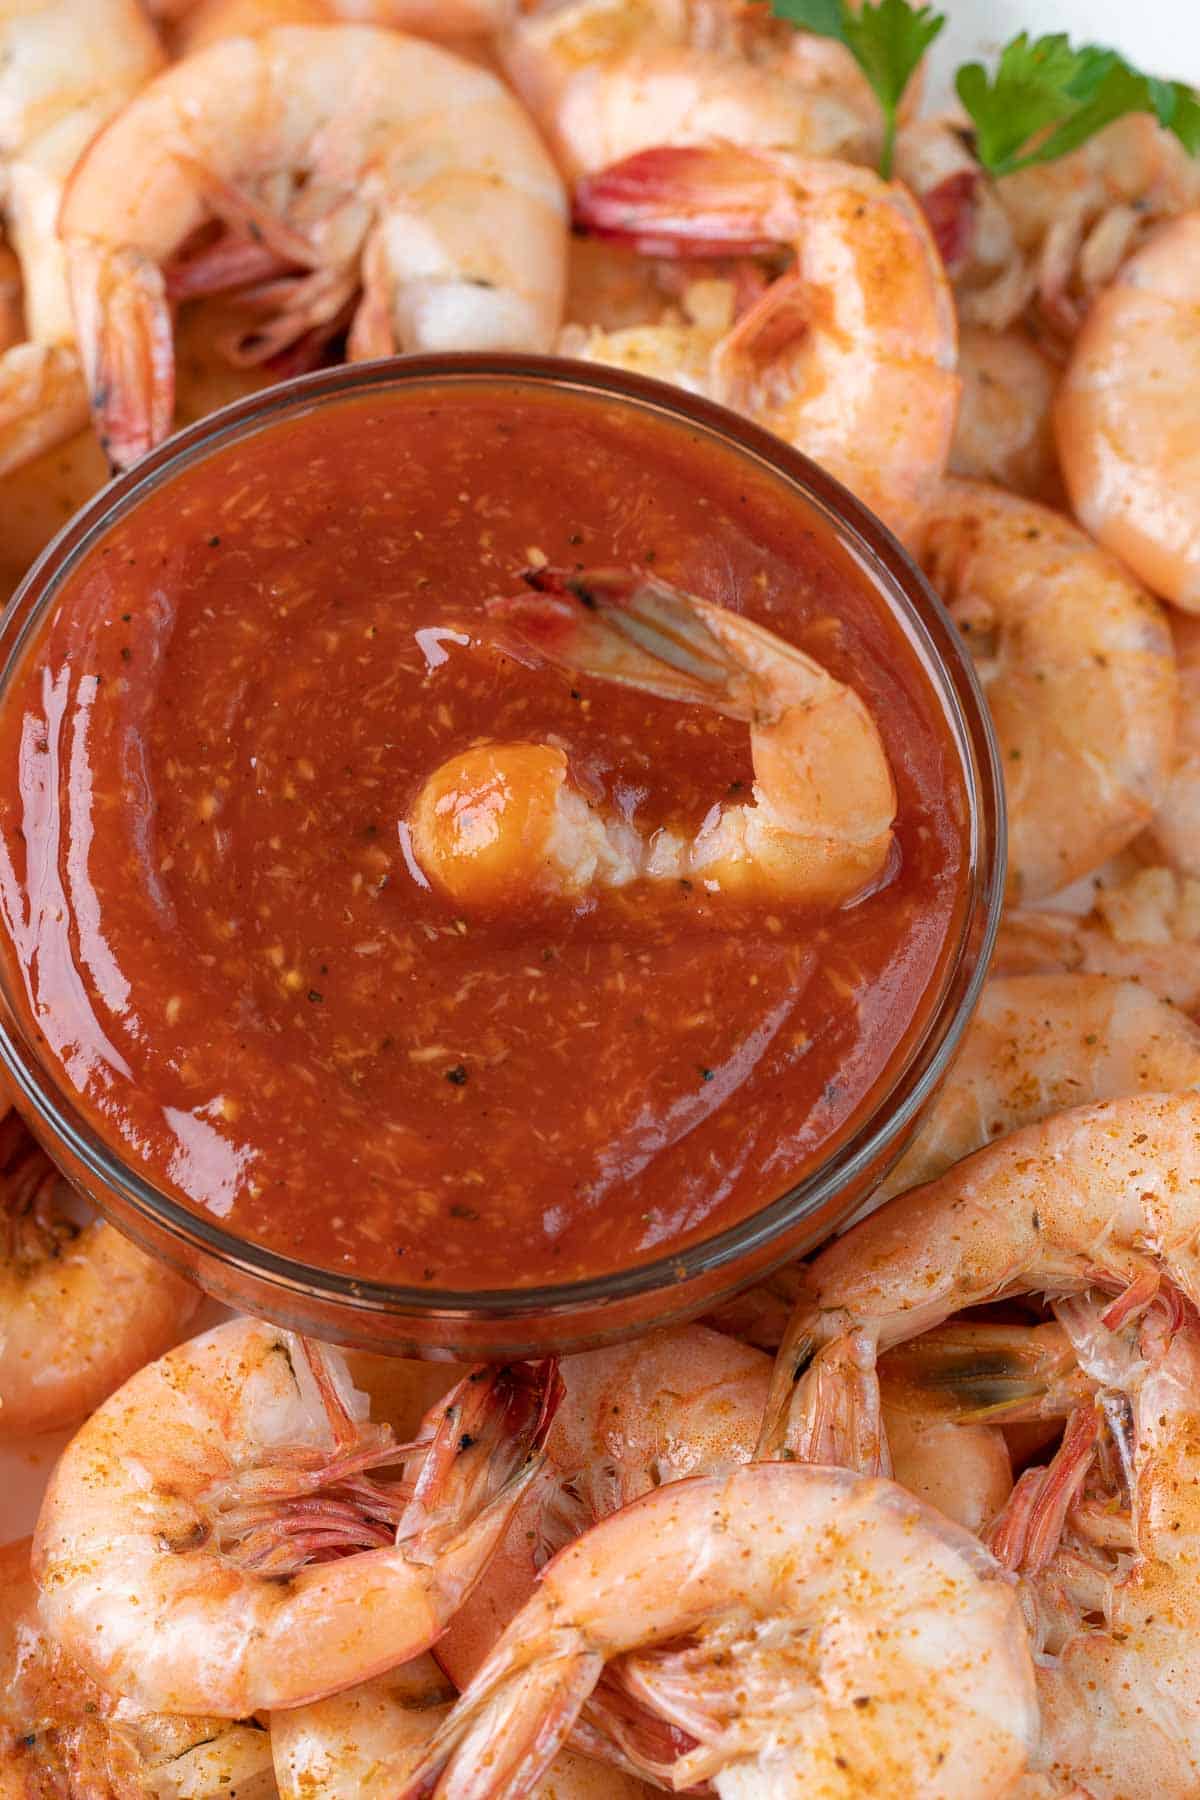 Overhead closeup view of a shrimp in a bowl of homemade cocktail sauce.